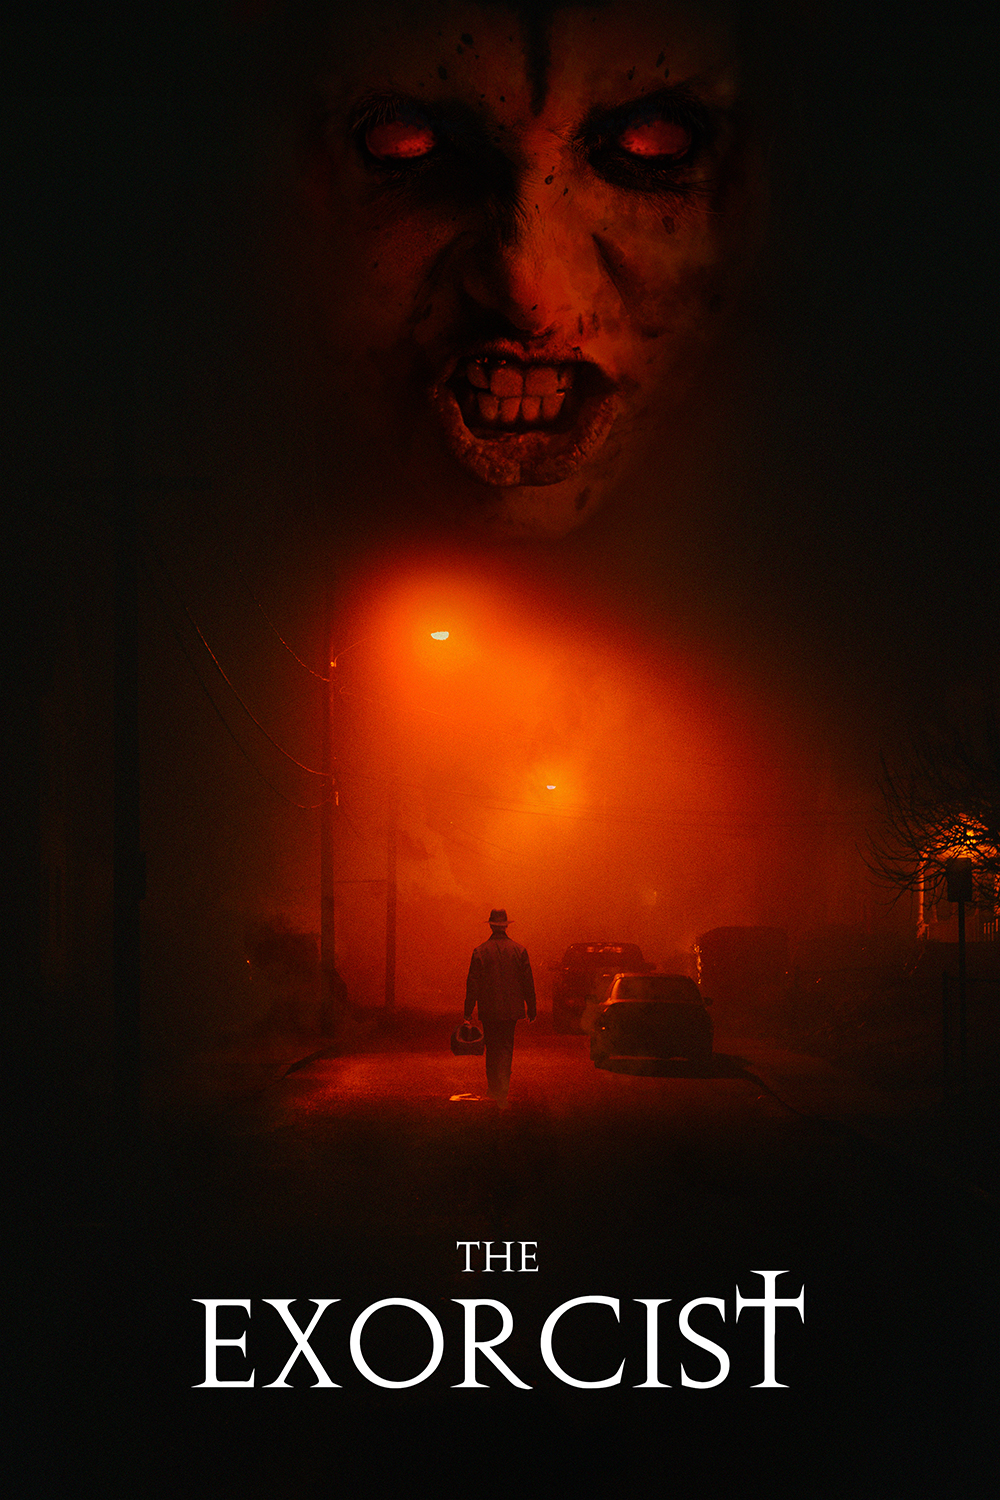 The Exorcist POSTER